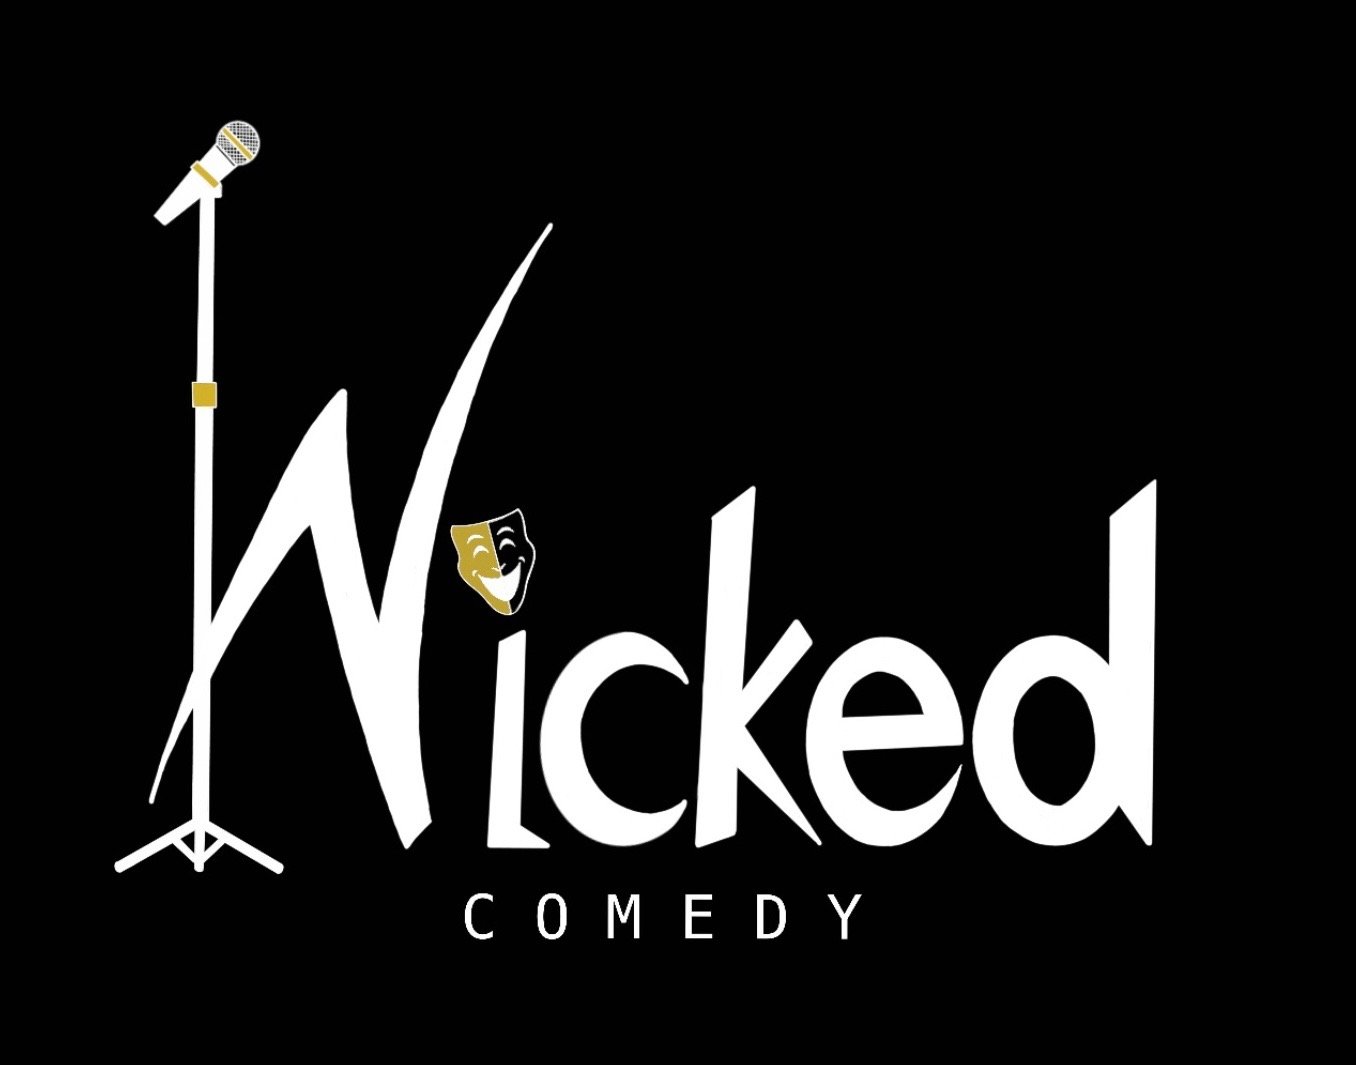 Wicked Comedy